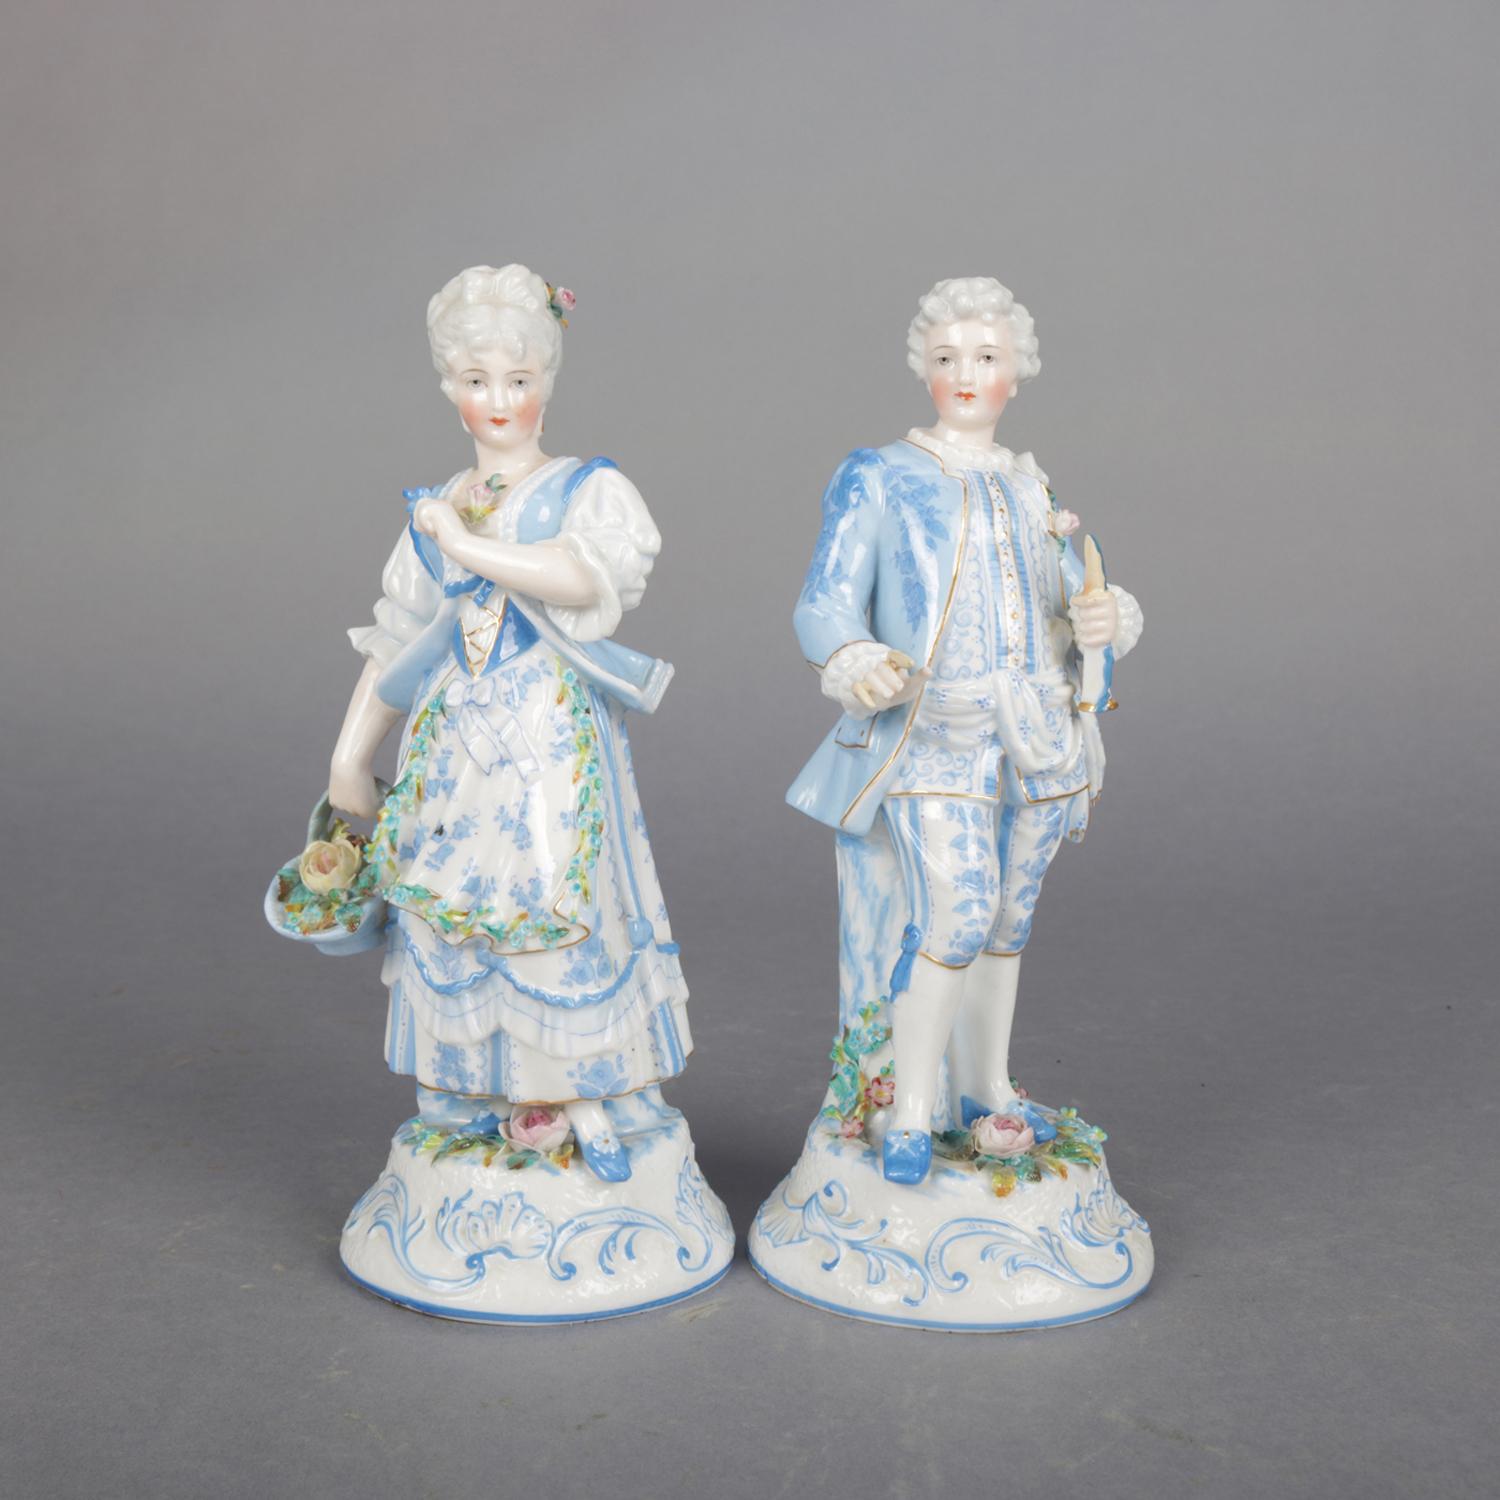 A pair of antique German Porzellanfabrik Unger Schneider CIE hand painted and gilt porcelain figures of courting couple in countryside setting, primarily blue and white, 